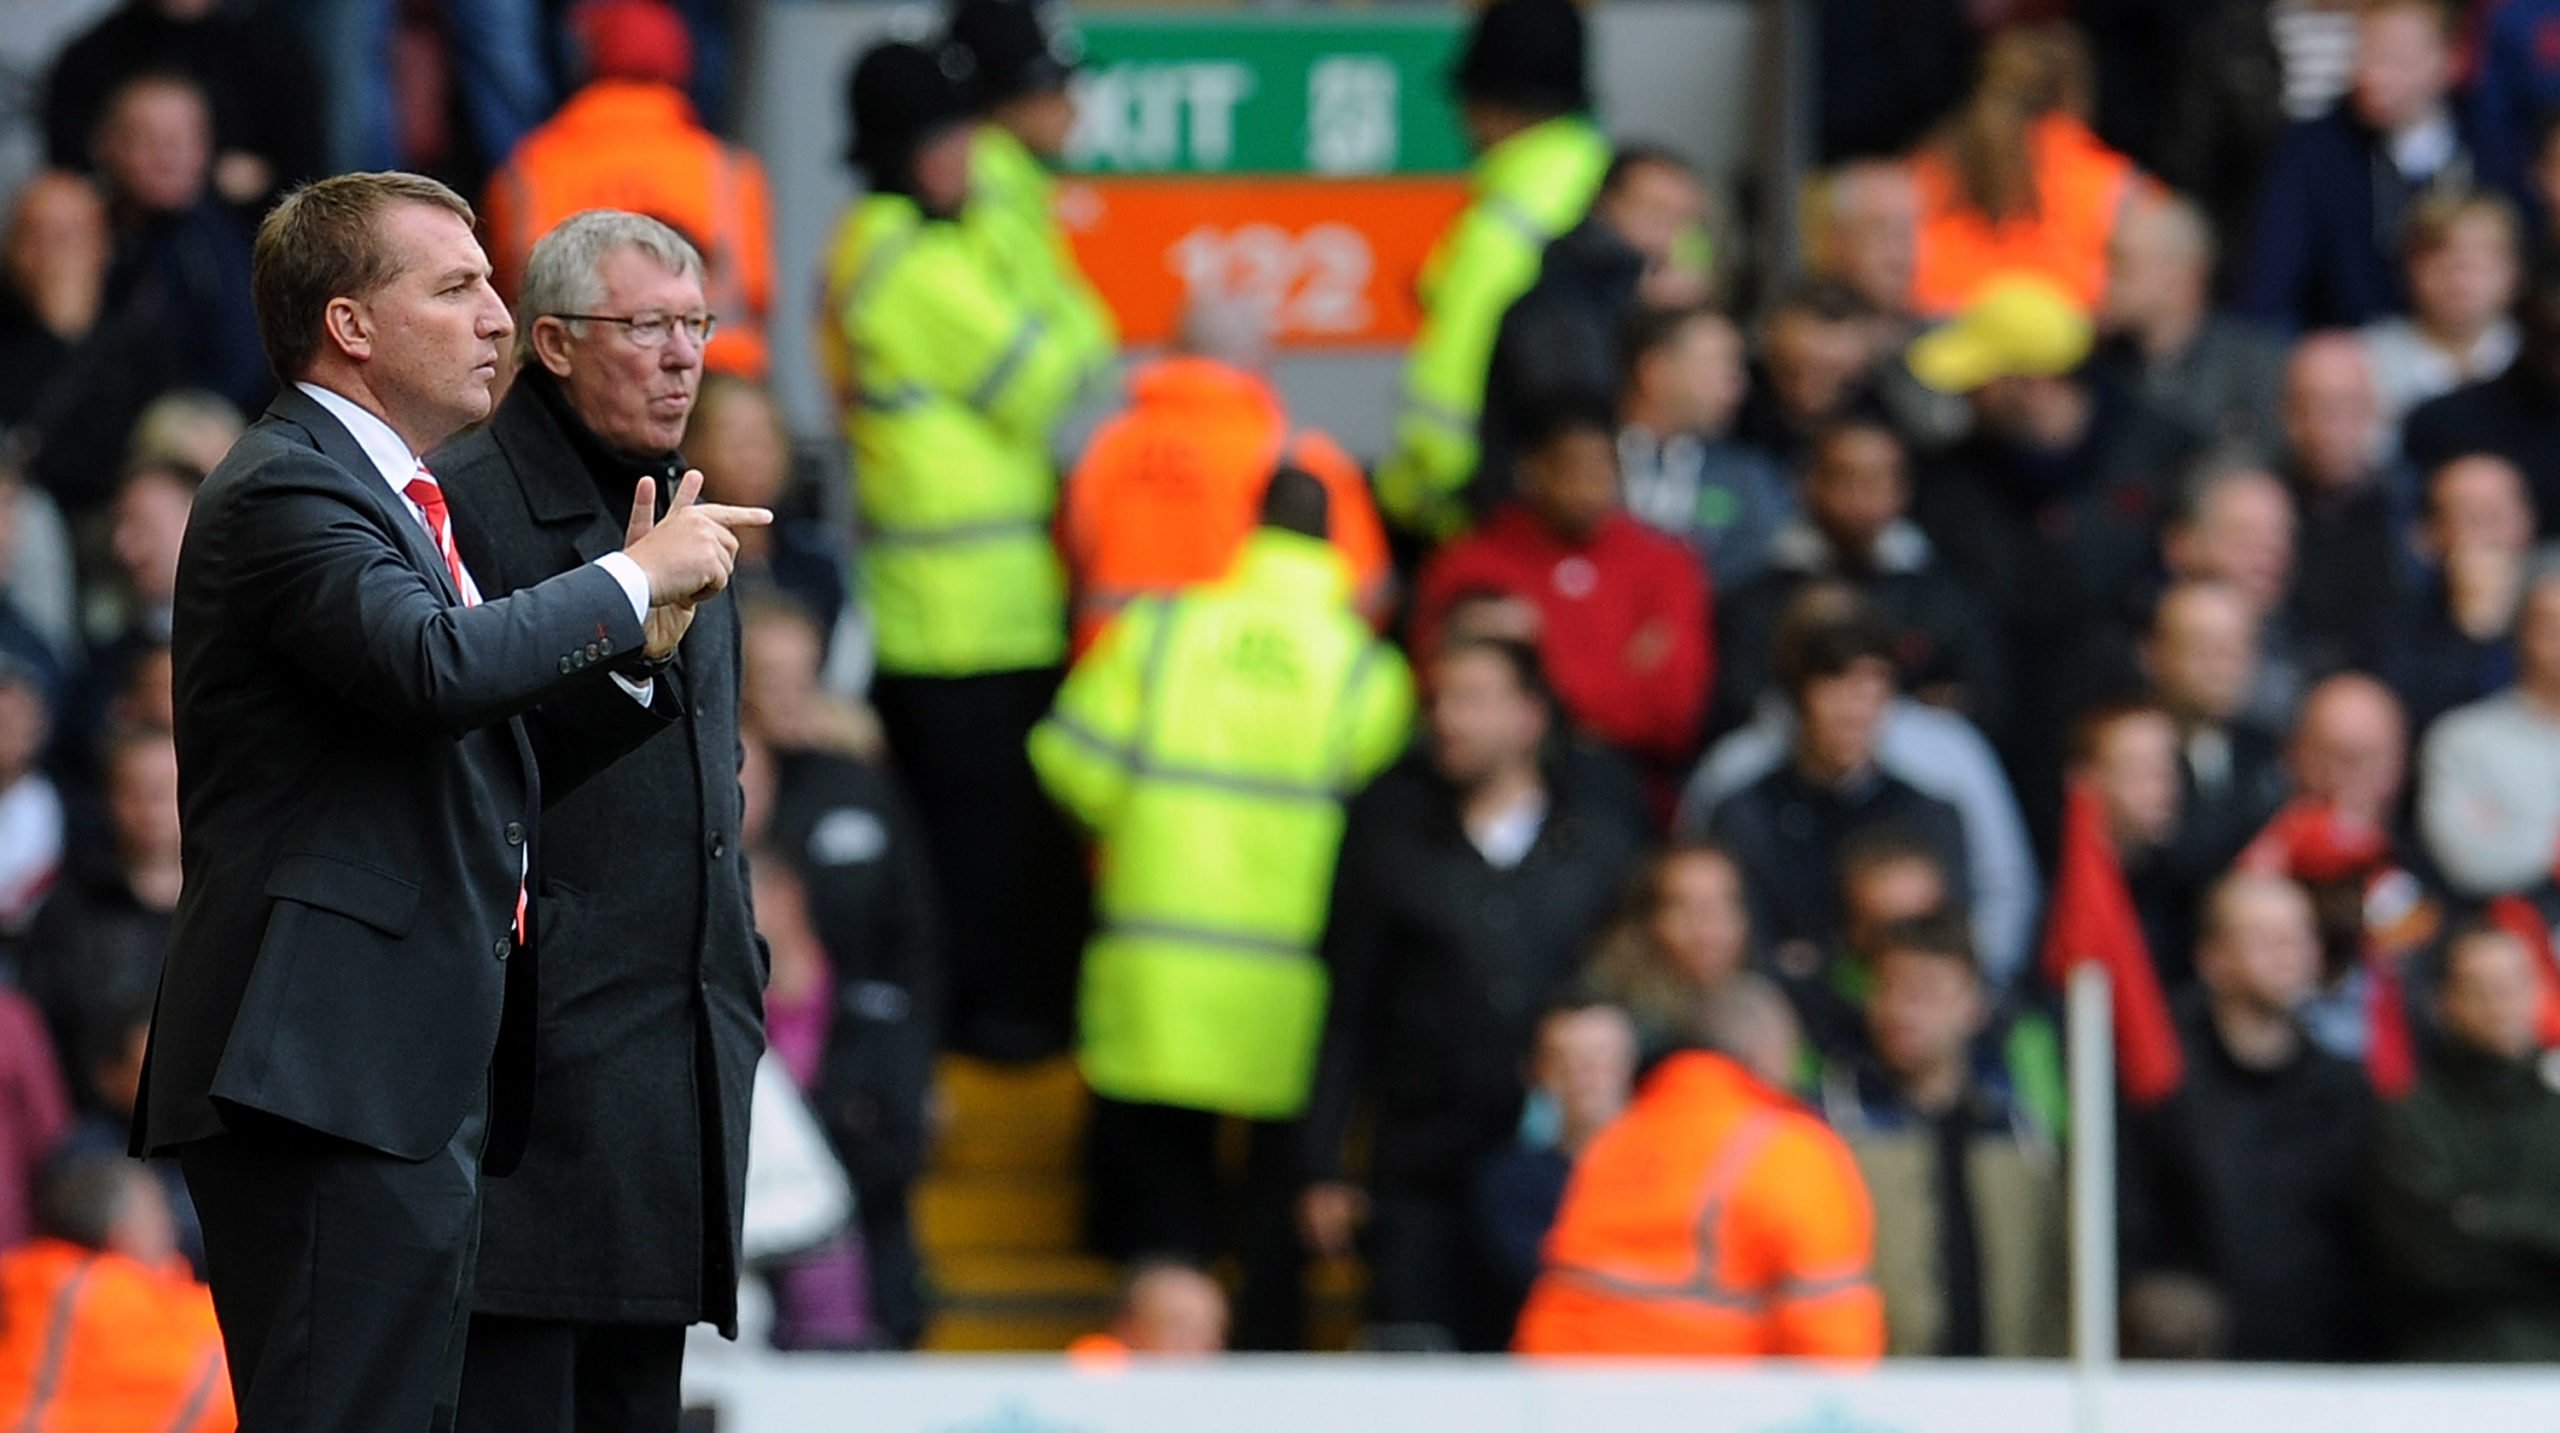 Brendan Rodgers comments on Sir Alex Ferguson suggest he could be tempted by United